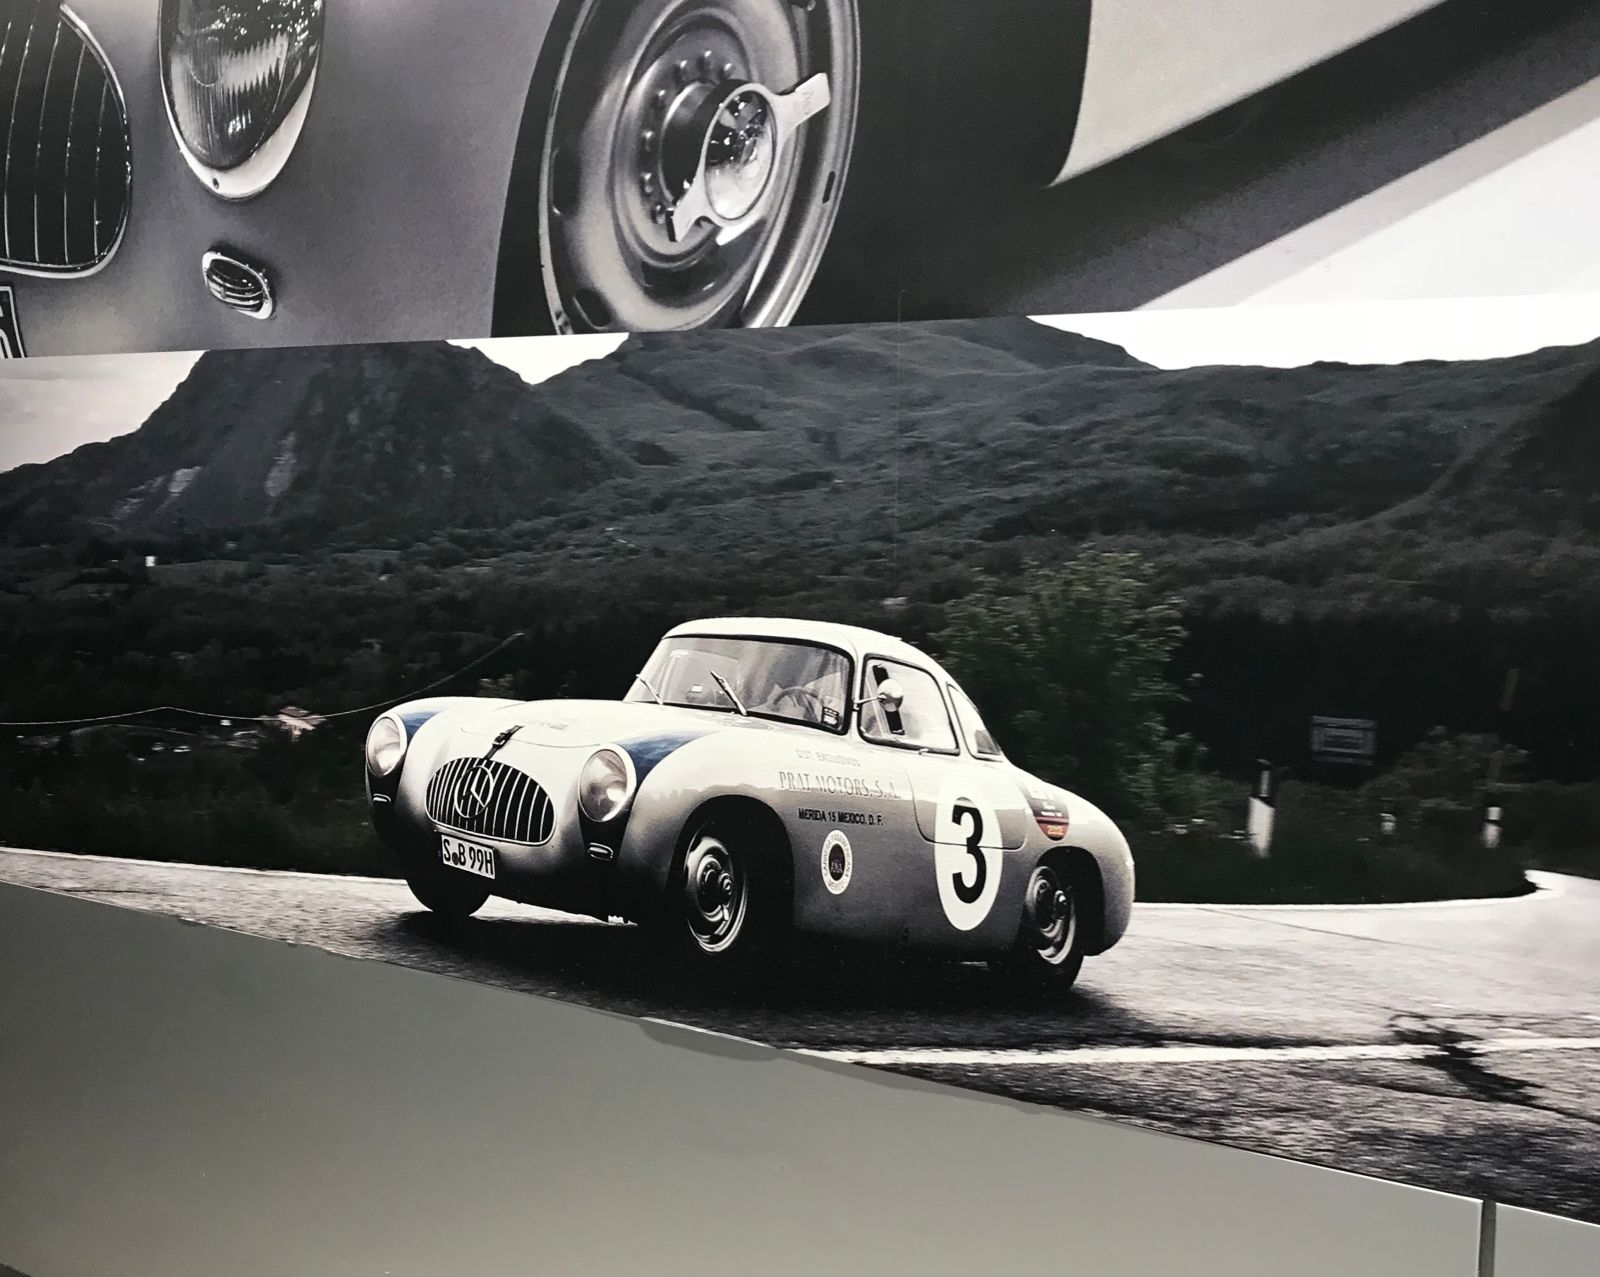 Mural in the service bay of my Mercedes dealership